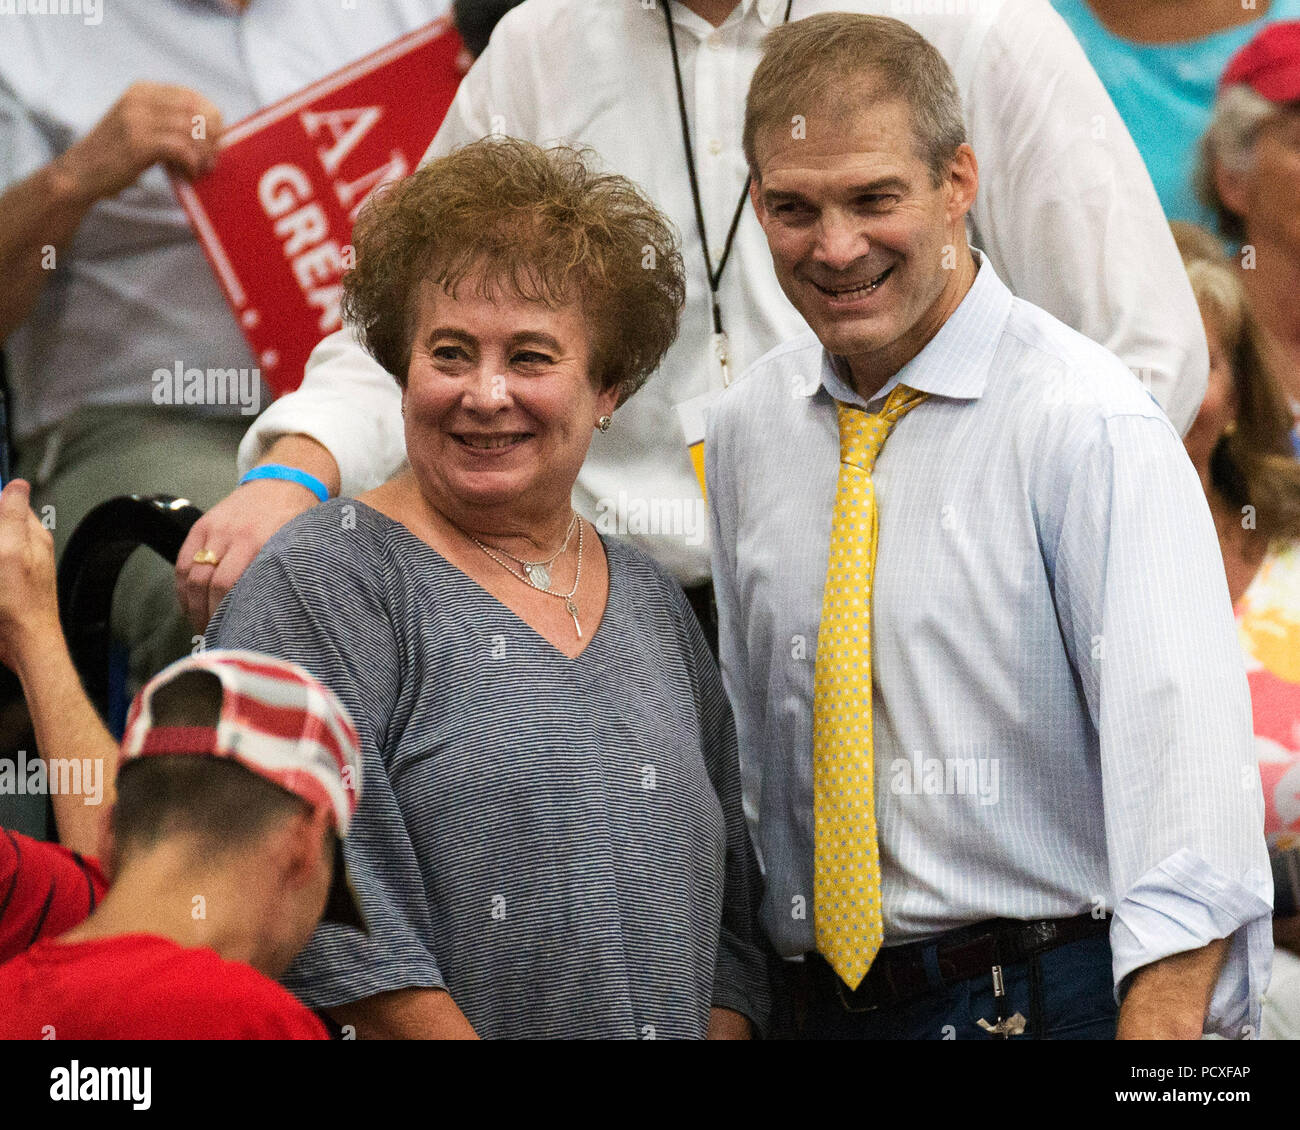 Ohio, USA. 4 August 2018. Ohio Representative Jim Jordan with a Trump Supporter at the make America Great Again Rally in Powell, Ohio USA. Brent Clark/Alamy Live News Stock Photo